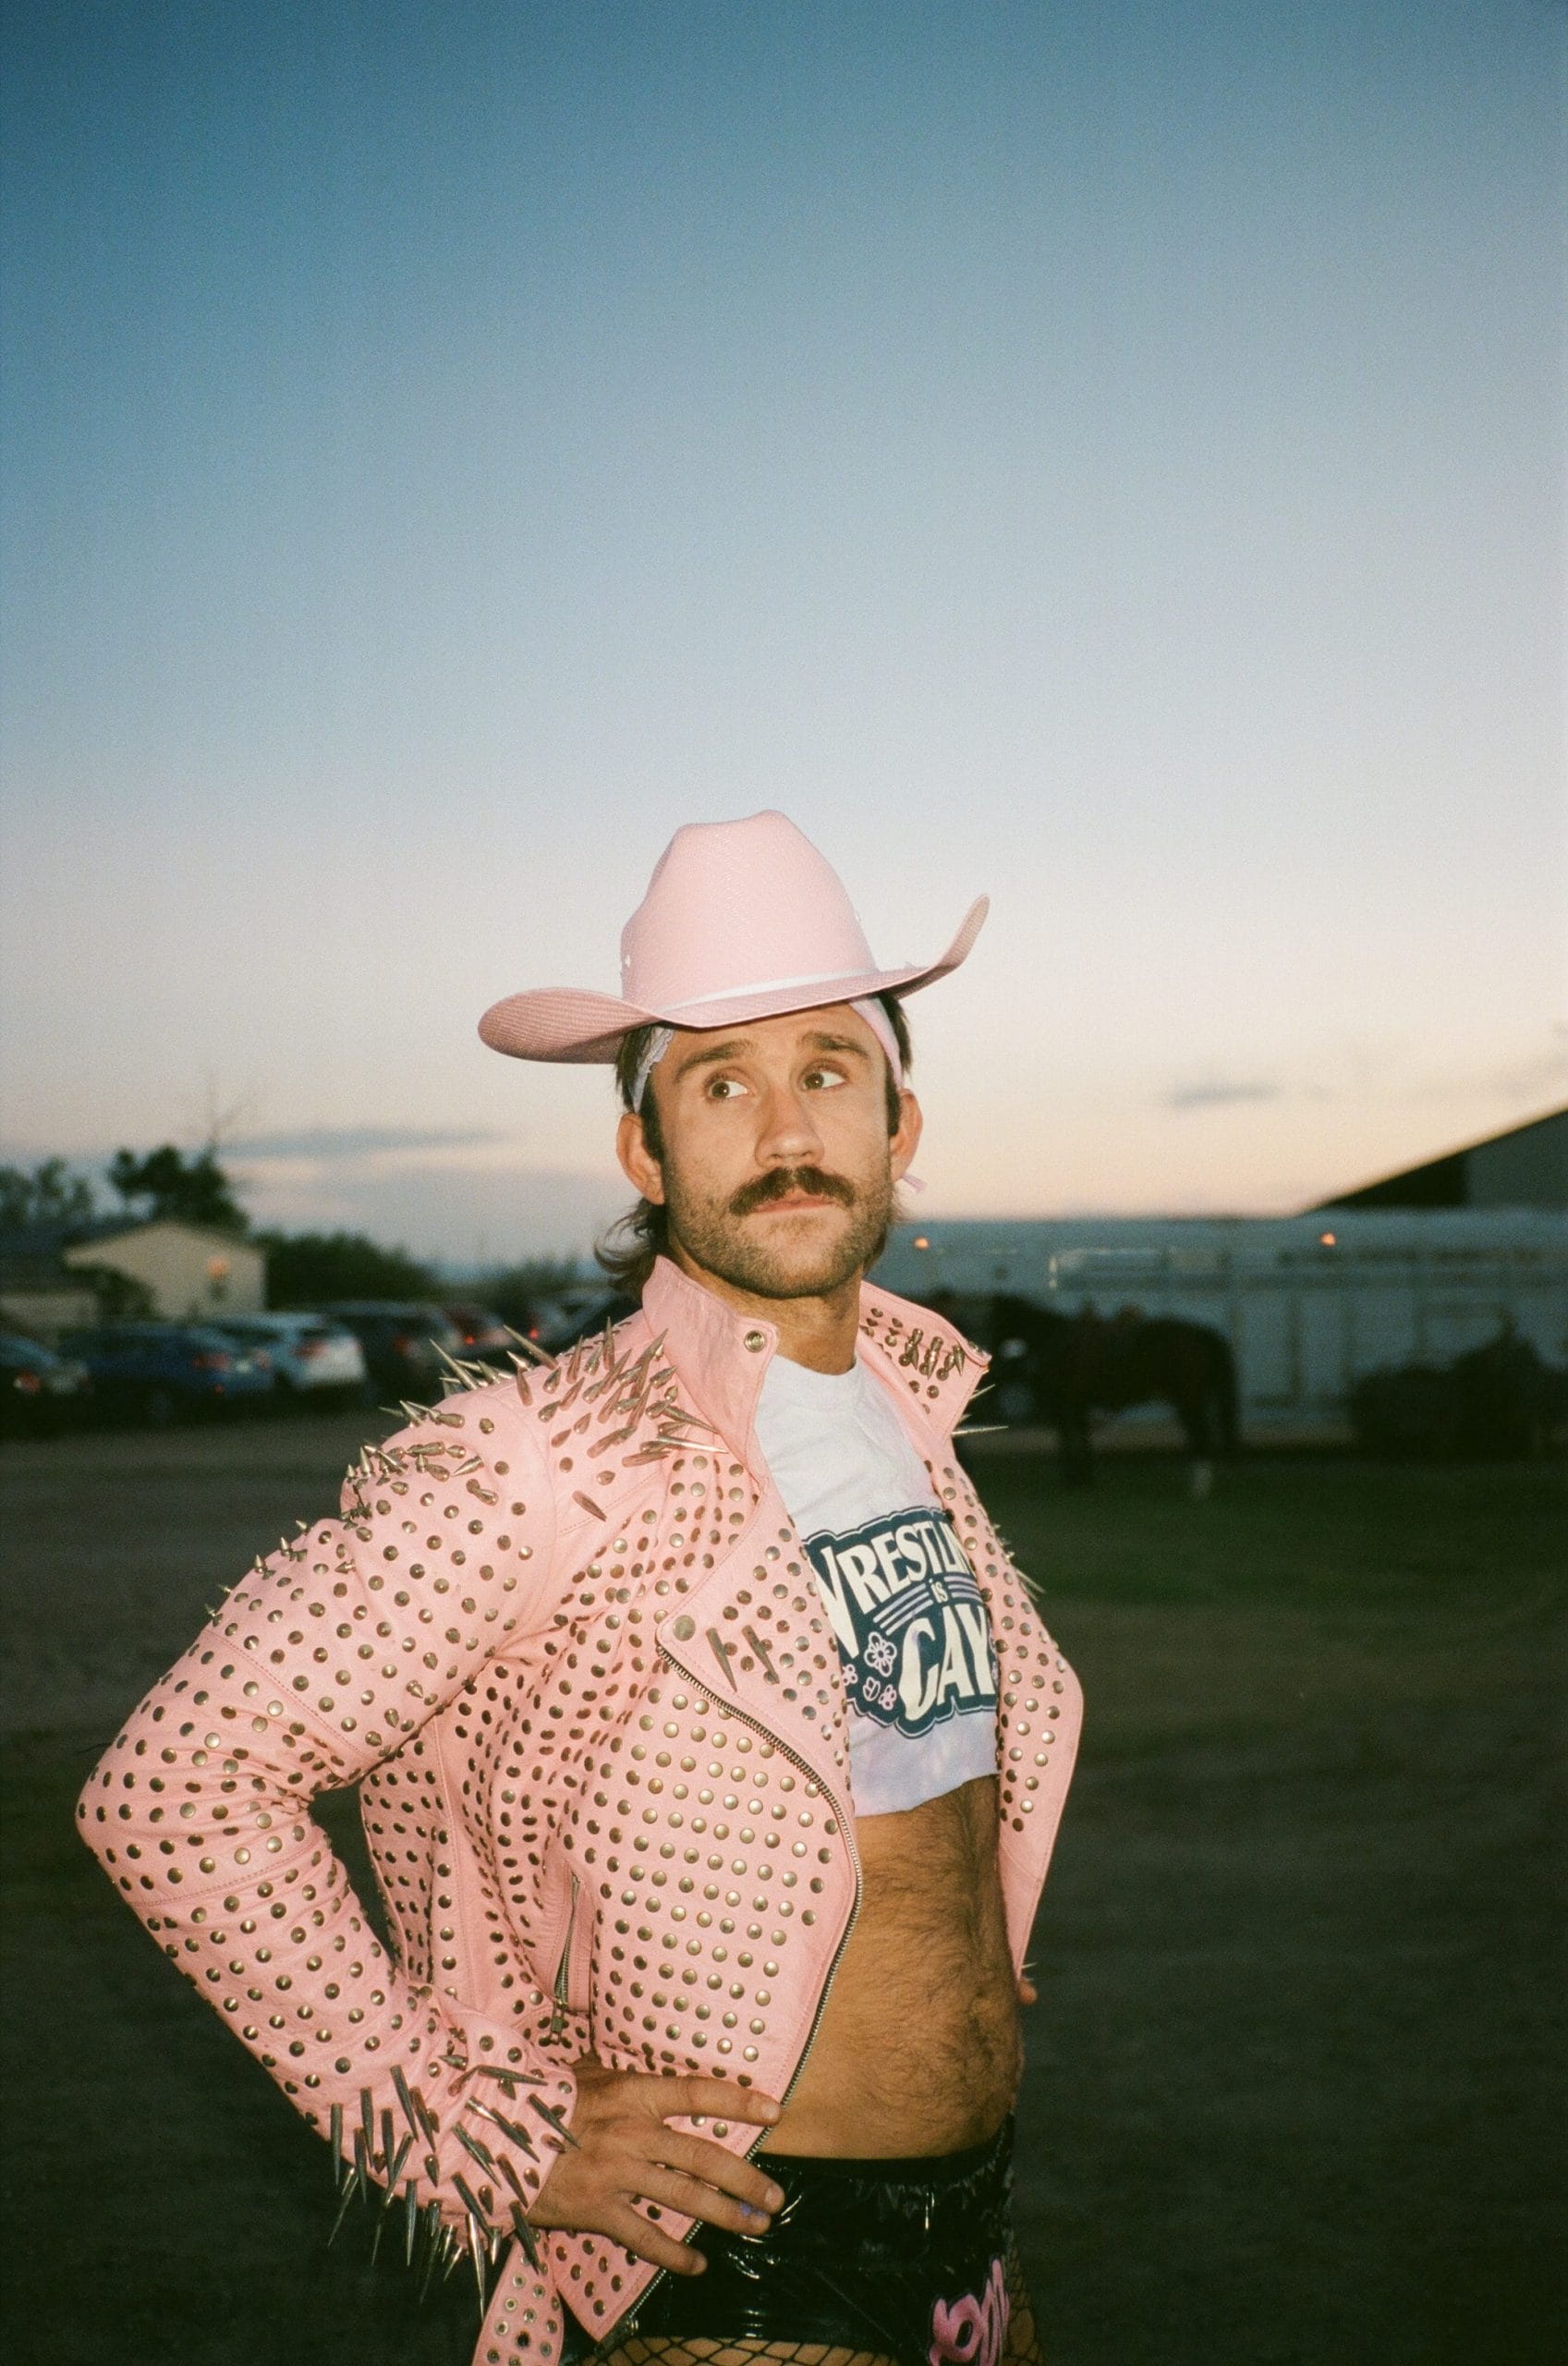 A mustachioed man in a cowboy hat, and a studded jacket over a crop top that states "wrestling is gay"